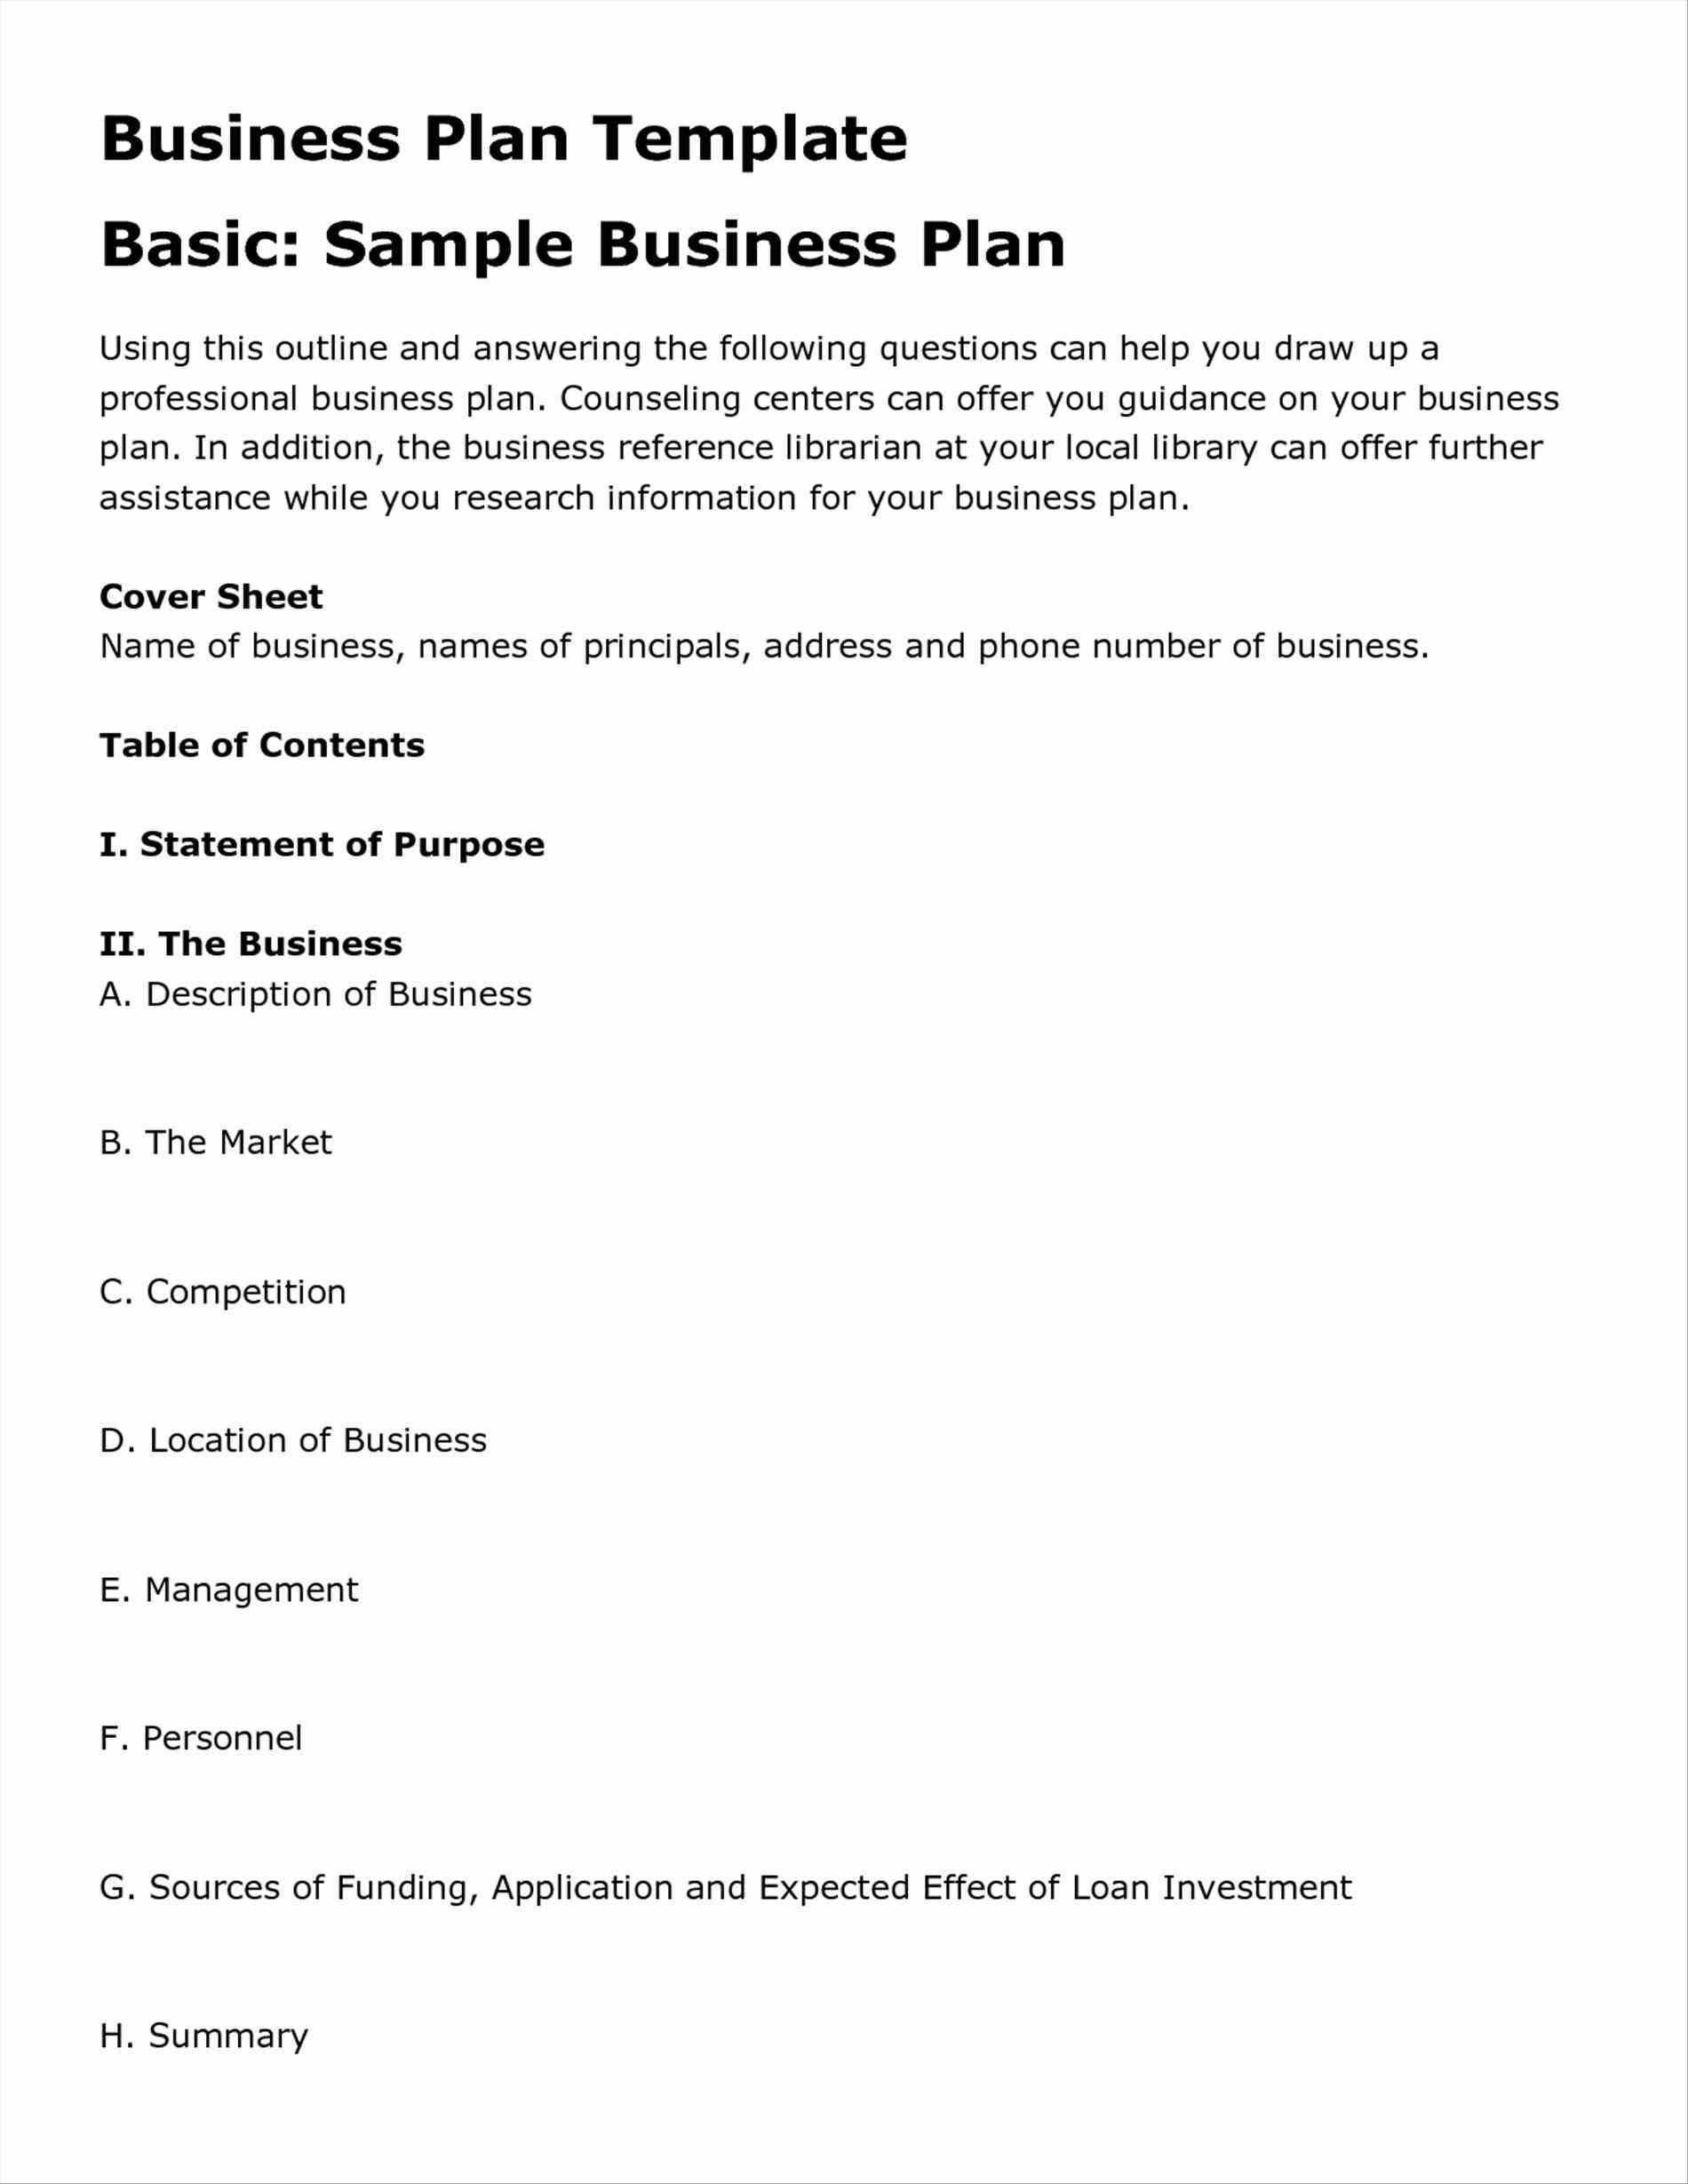 Business Plans Plan Template Word Doc Free Sample Disaster With Regard To Business Plan Template Free Word Document